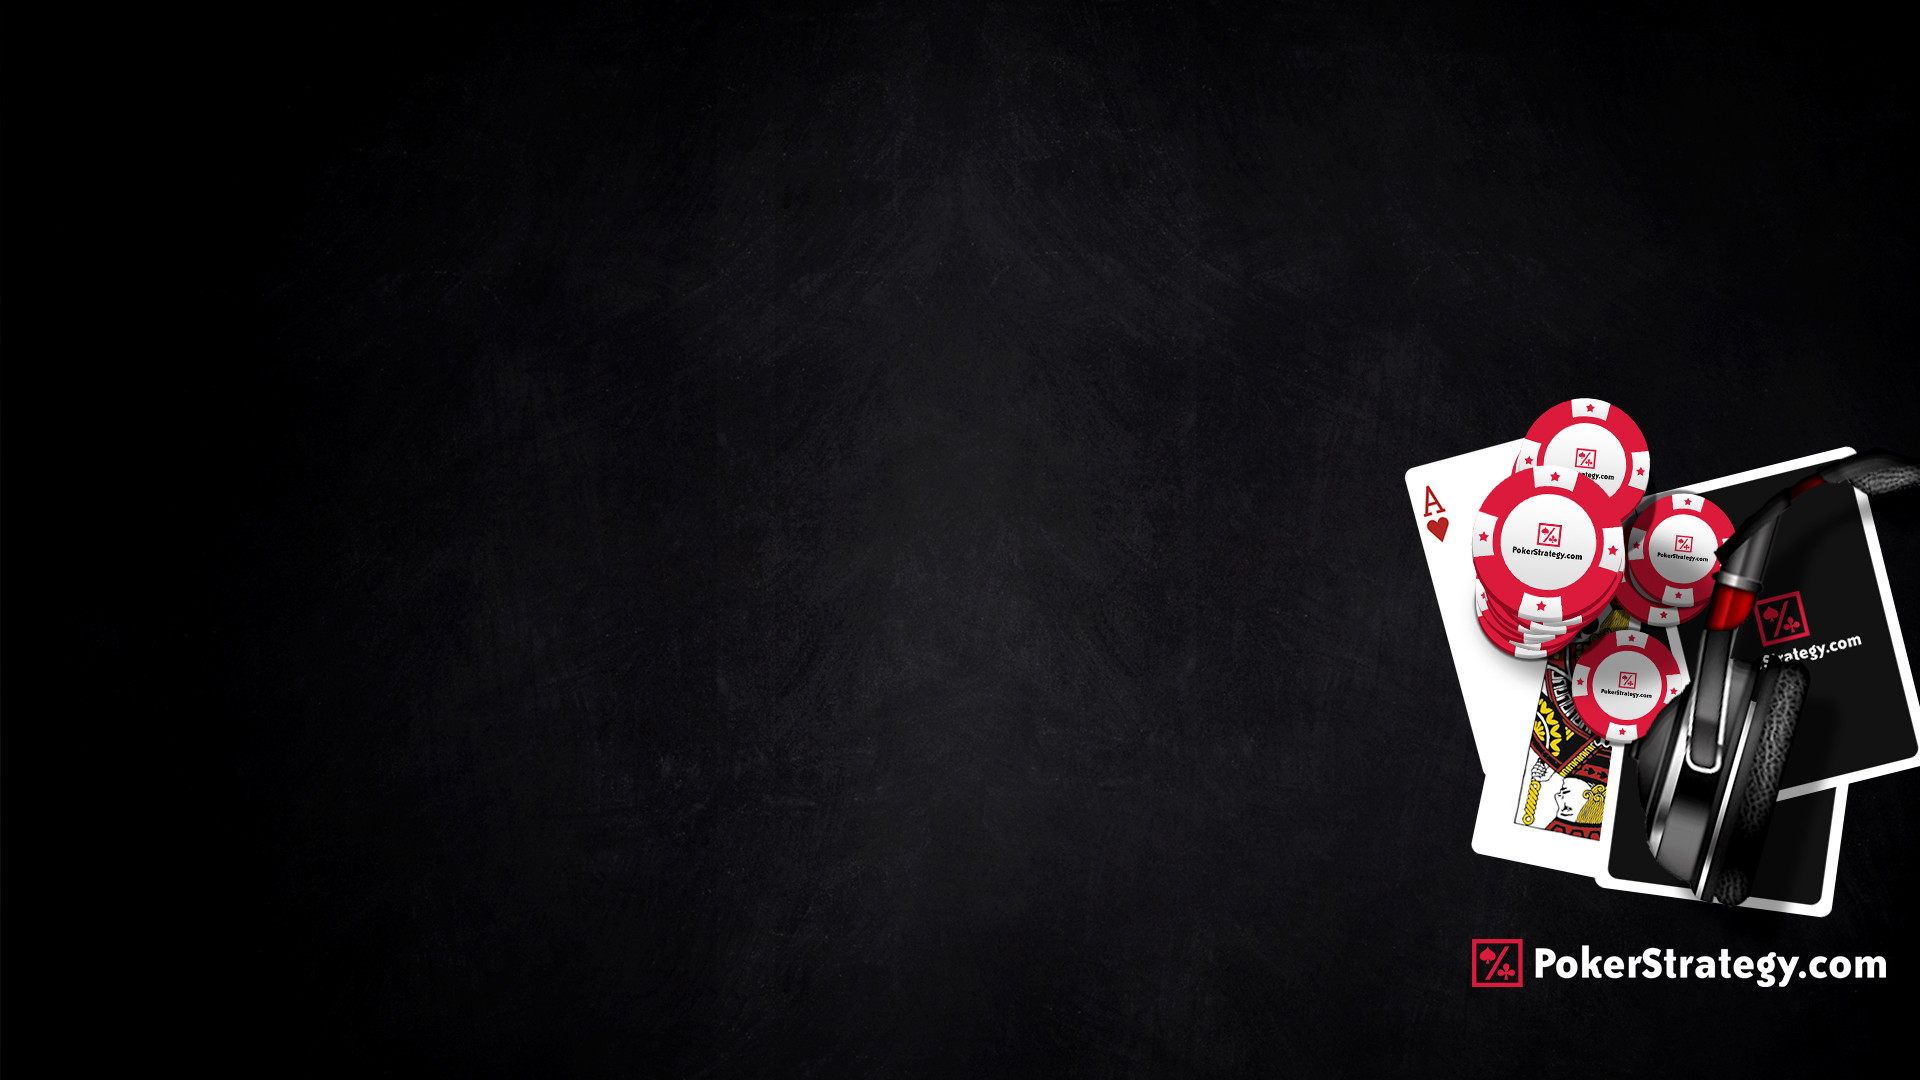 1920x1080 Click on the image to download Poker wallpaper